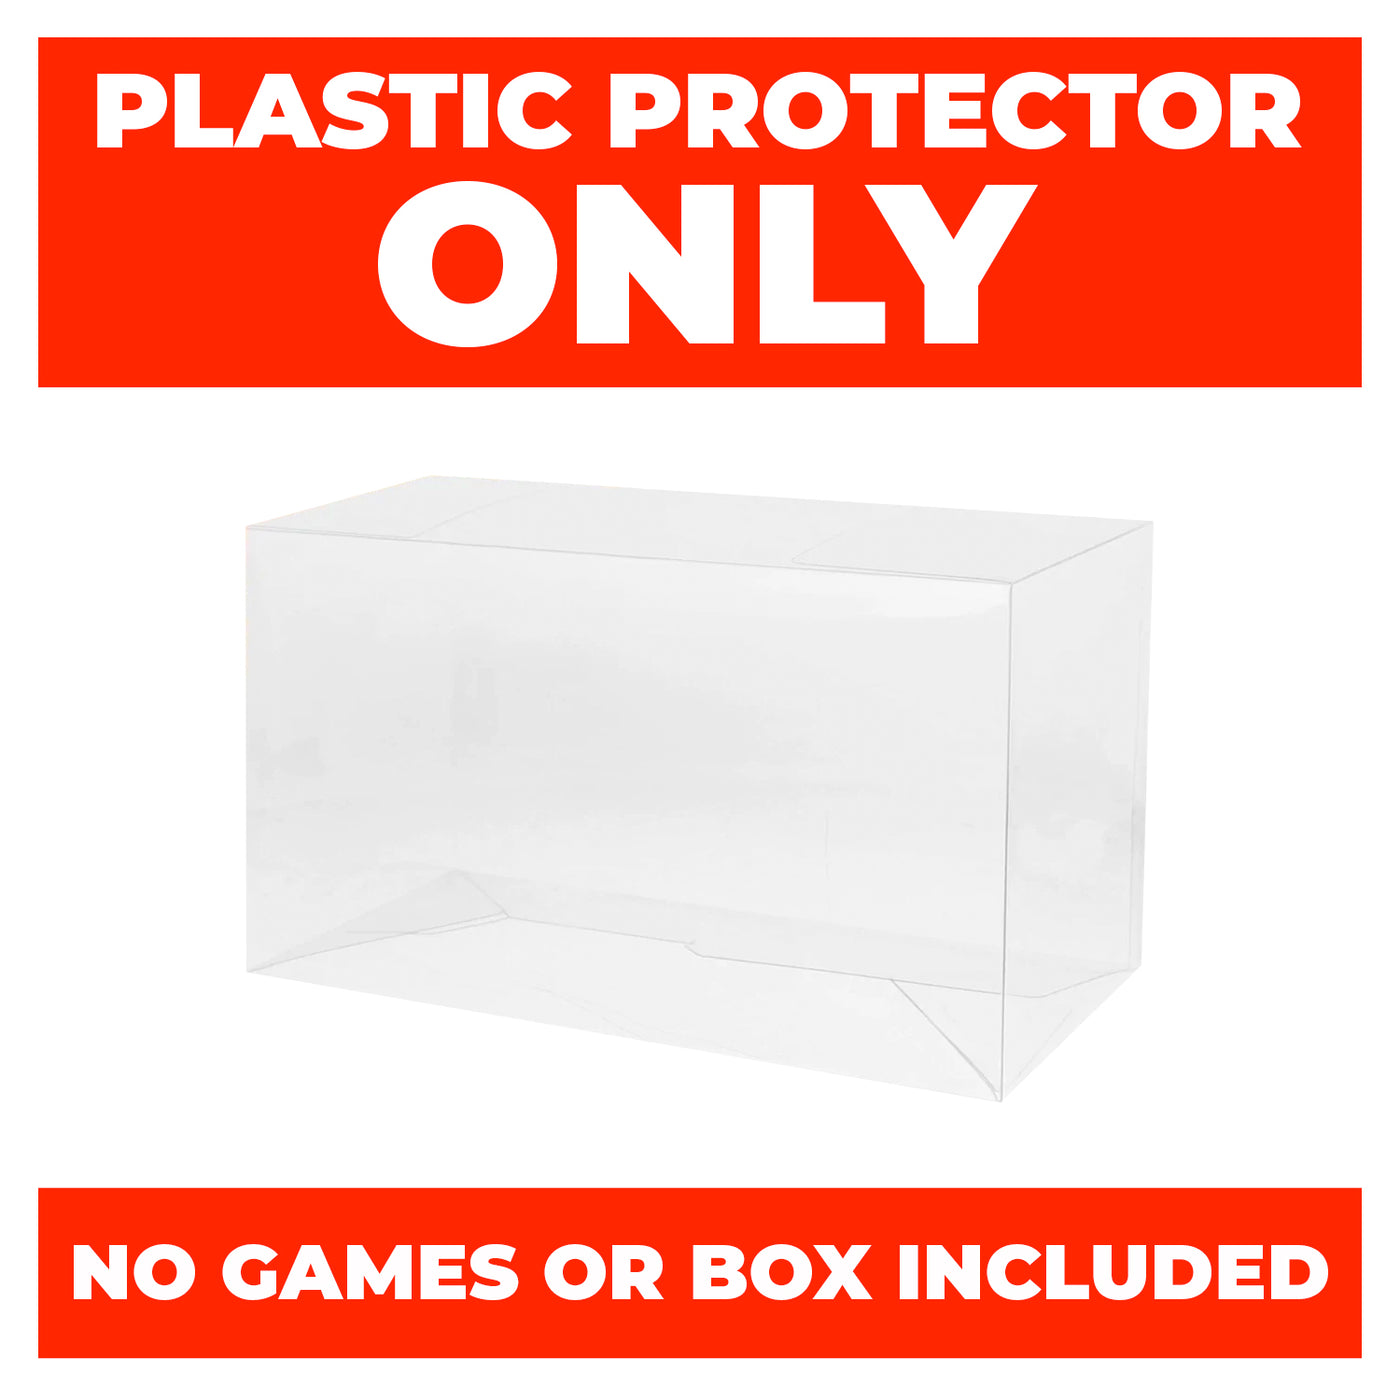 Plastic Protector for BLU-RAY, PS3, PS4, PS5, XBOX ONE SERIES X Video Game Box 0.50mm thick, UV & Scratch Resistant 6.625h x 4.625w x 0.5d on The Pop Protector Guide by Display Geek